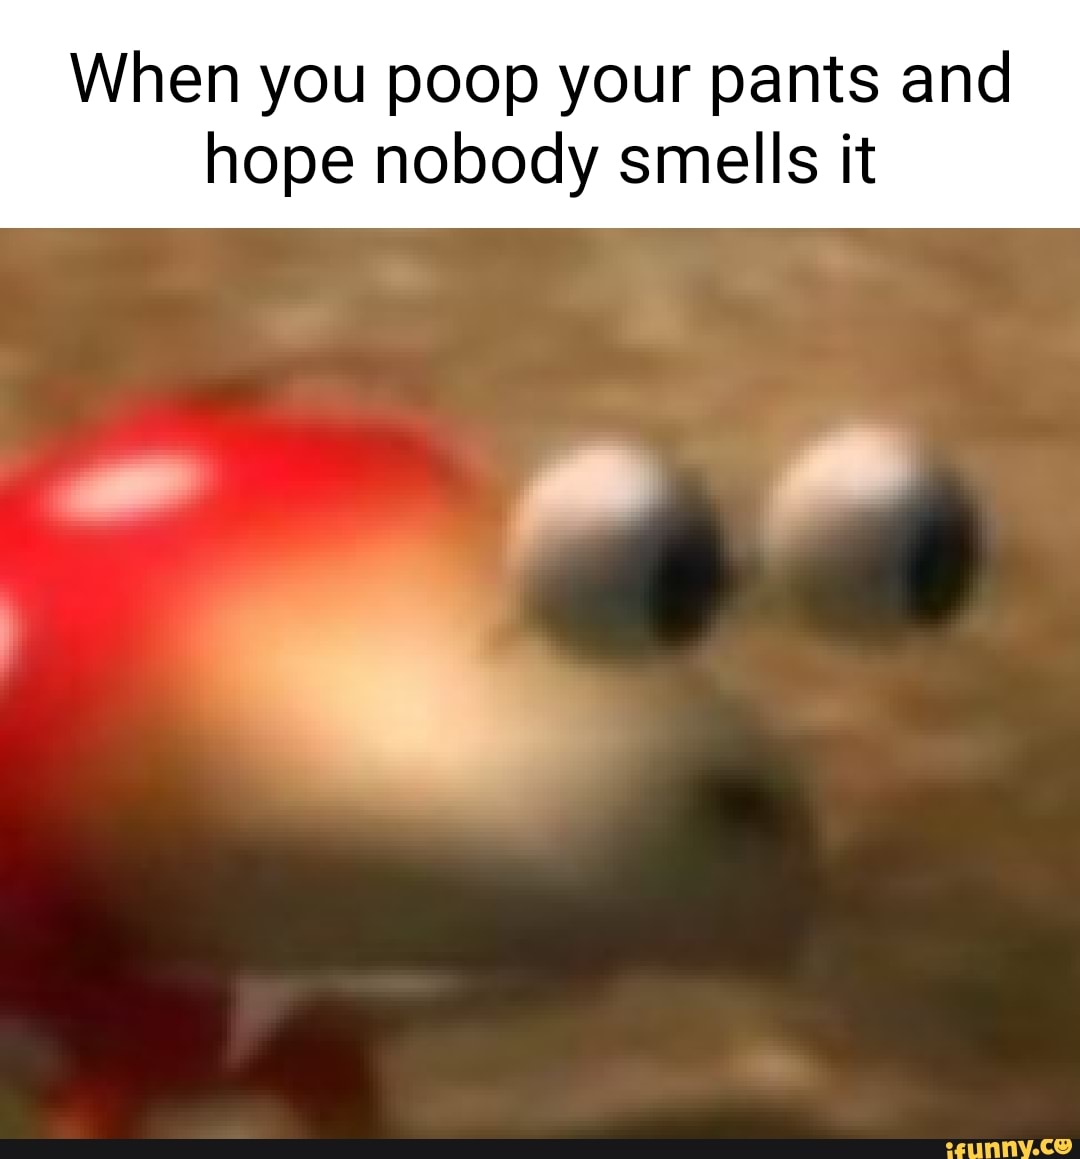 When You Poop Your Pants And Hope Nobody Smells It Ifunny